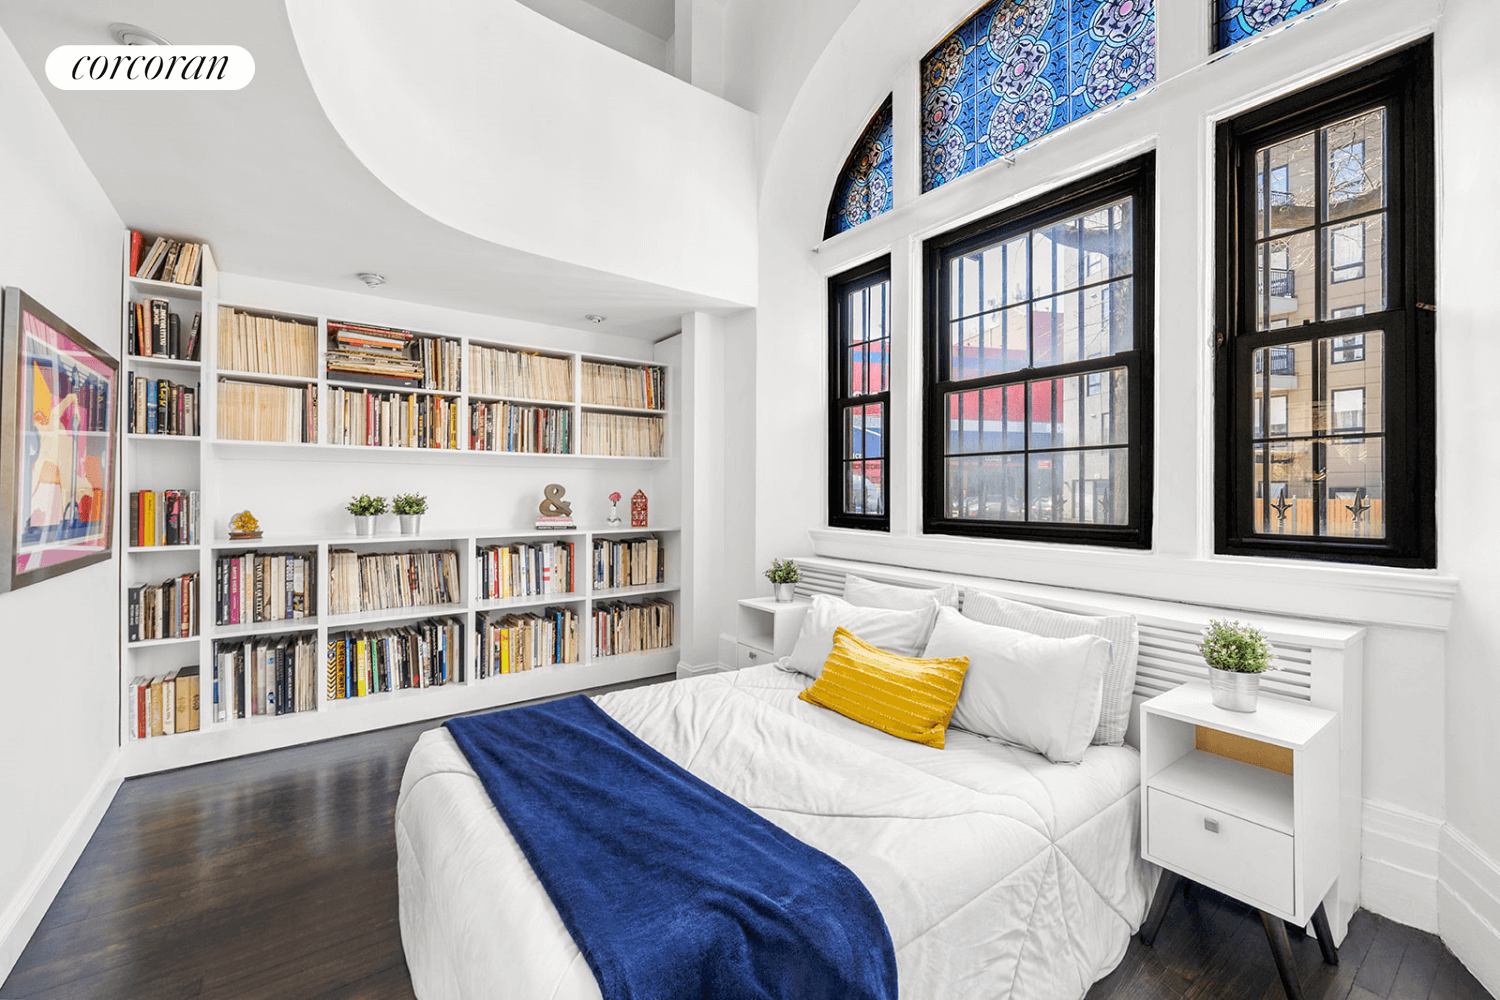 bedroom with a stained glass window and built-in bookcases